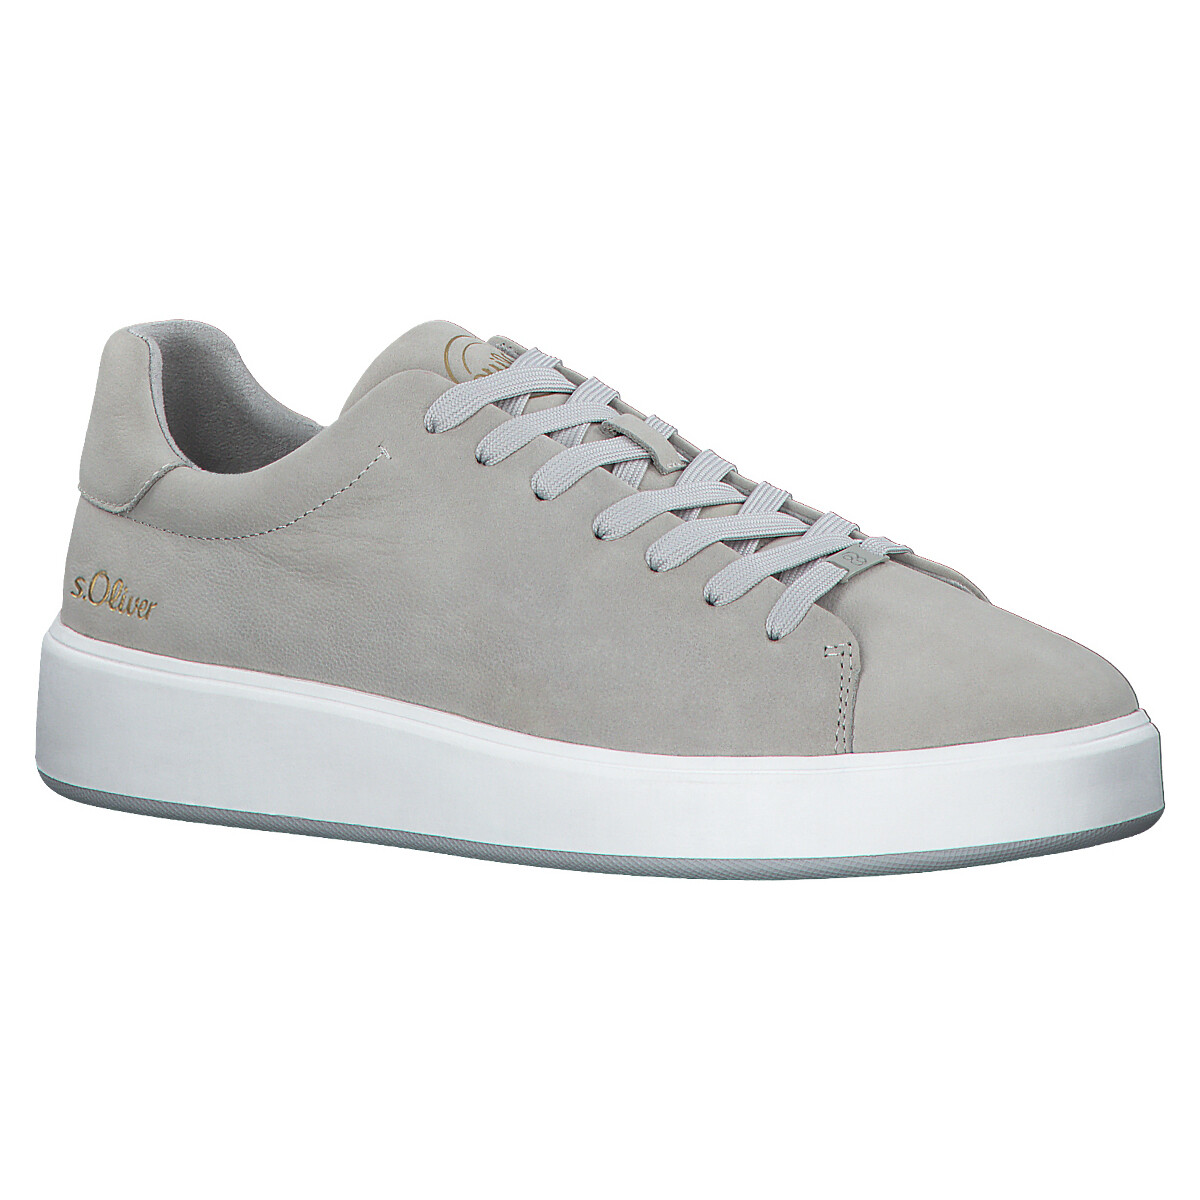 Sneakers S.Oliver Lt Grey (5-5-13640-30 001)